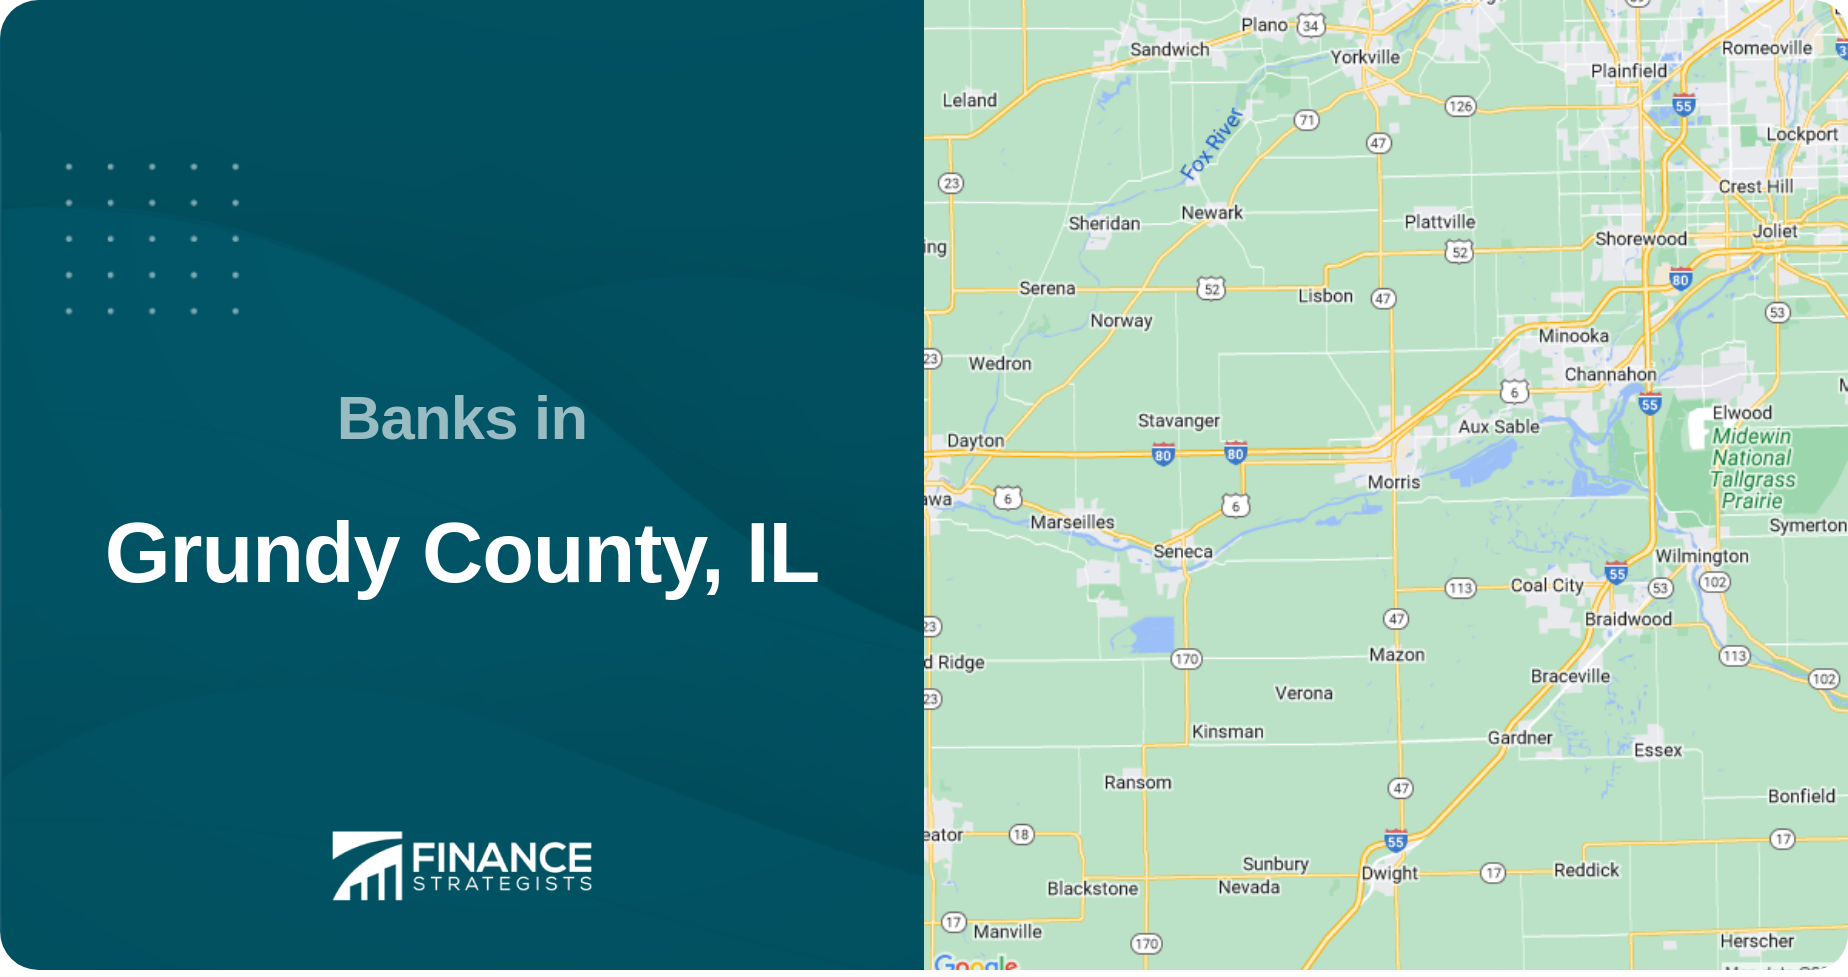 Banks in Grundy County, IL